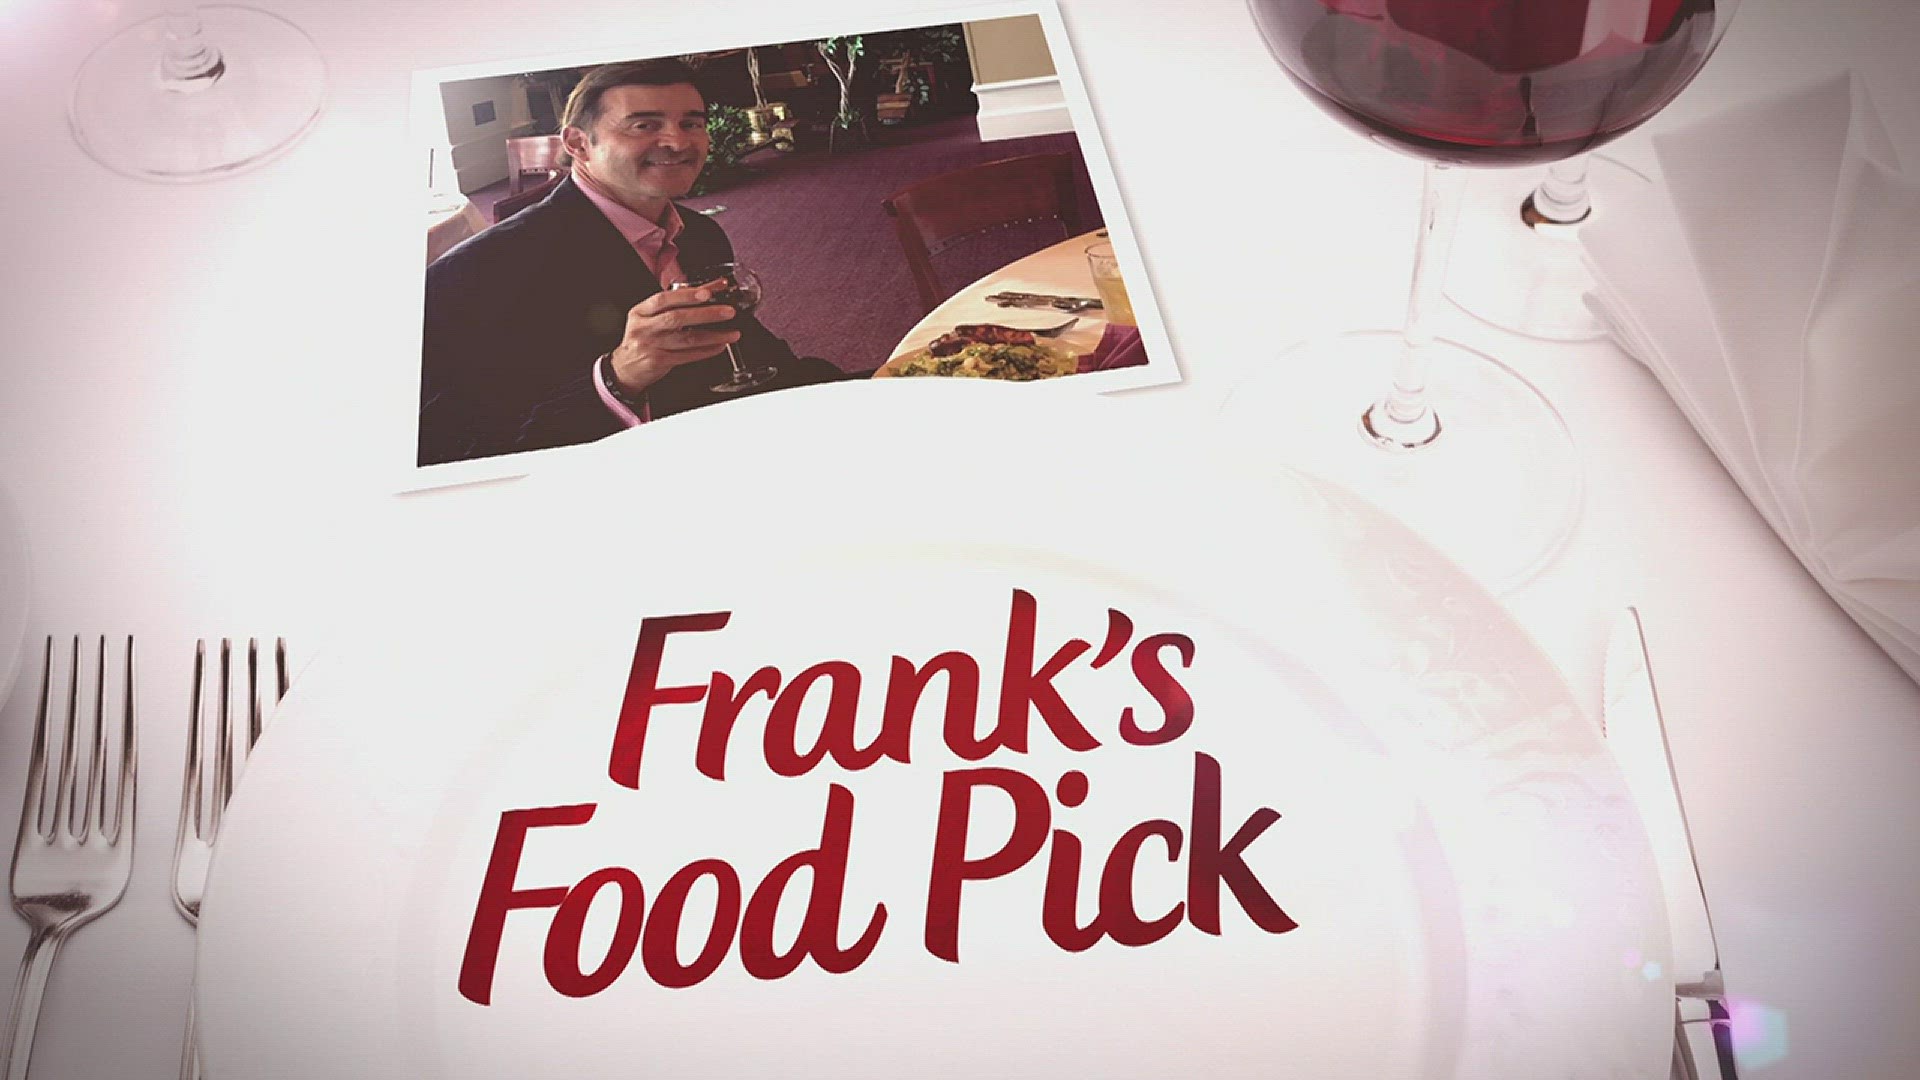 This week, Frank introduces to some of the best food you may ever eat.